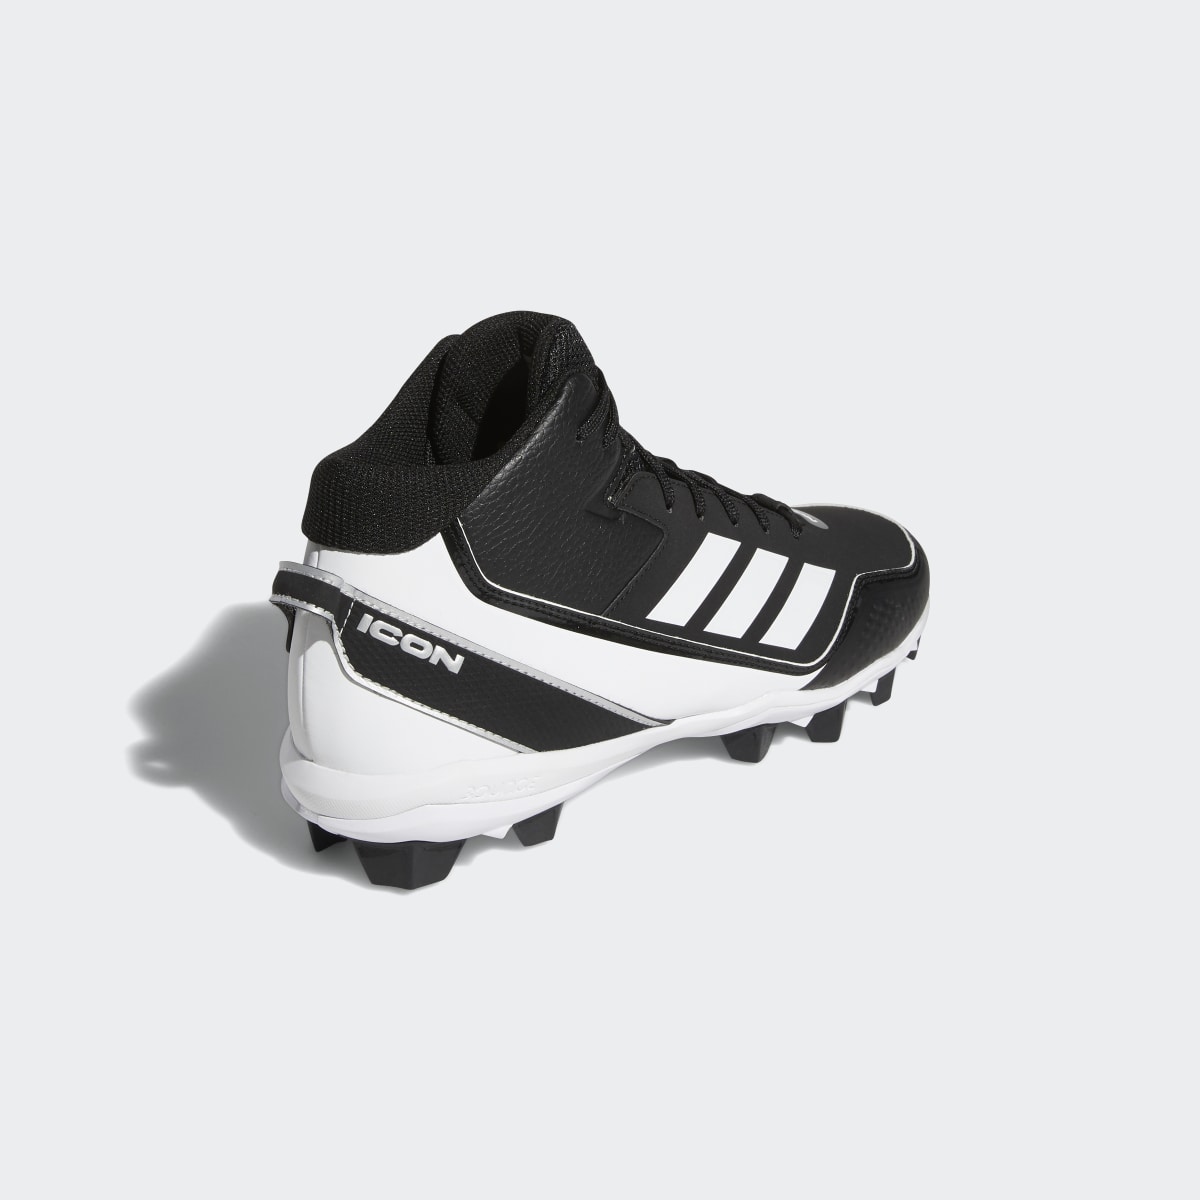 Adidas Icon 7 Mid MD Cleats. 6